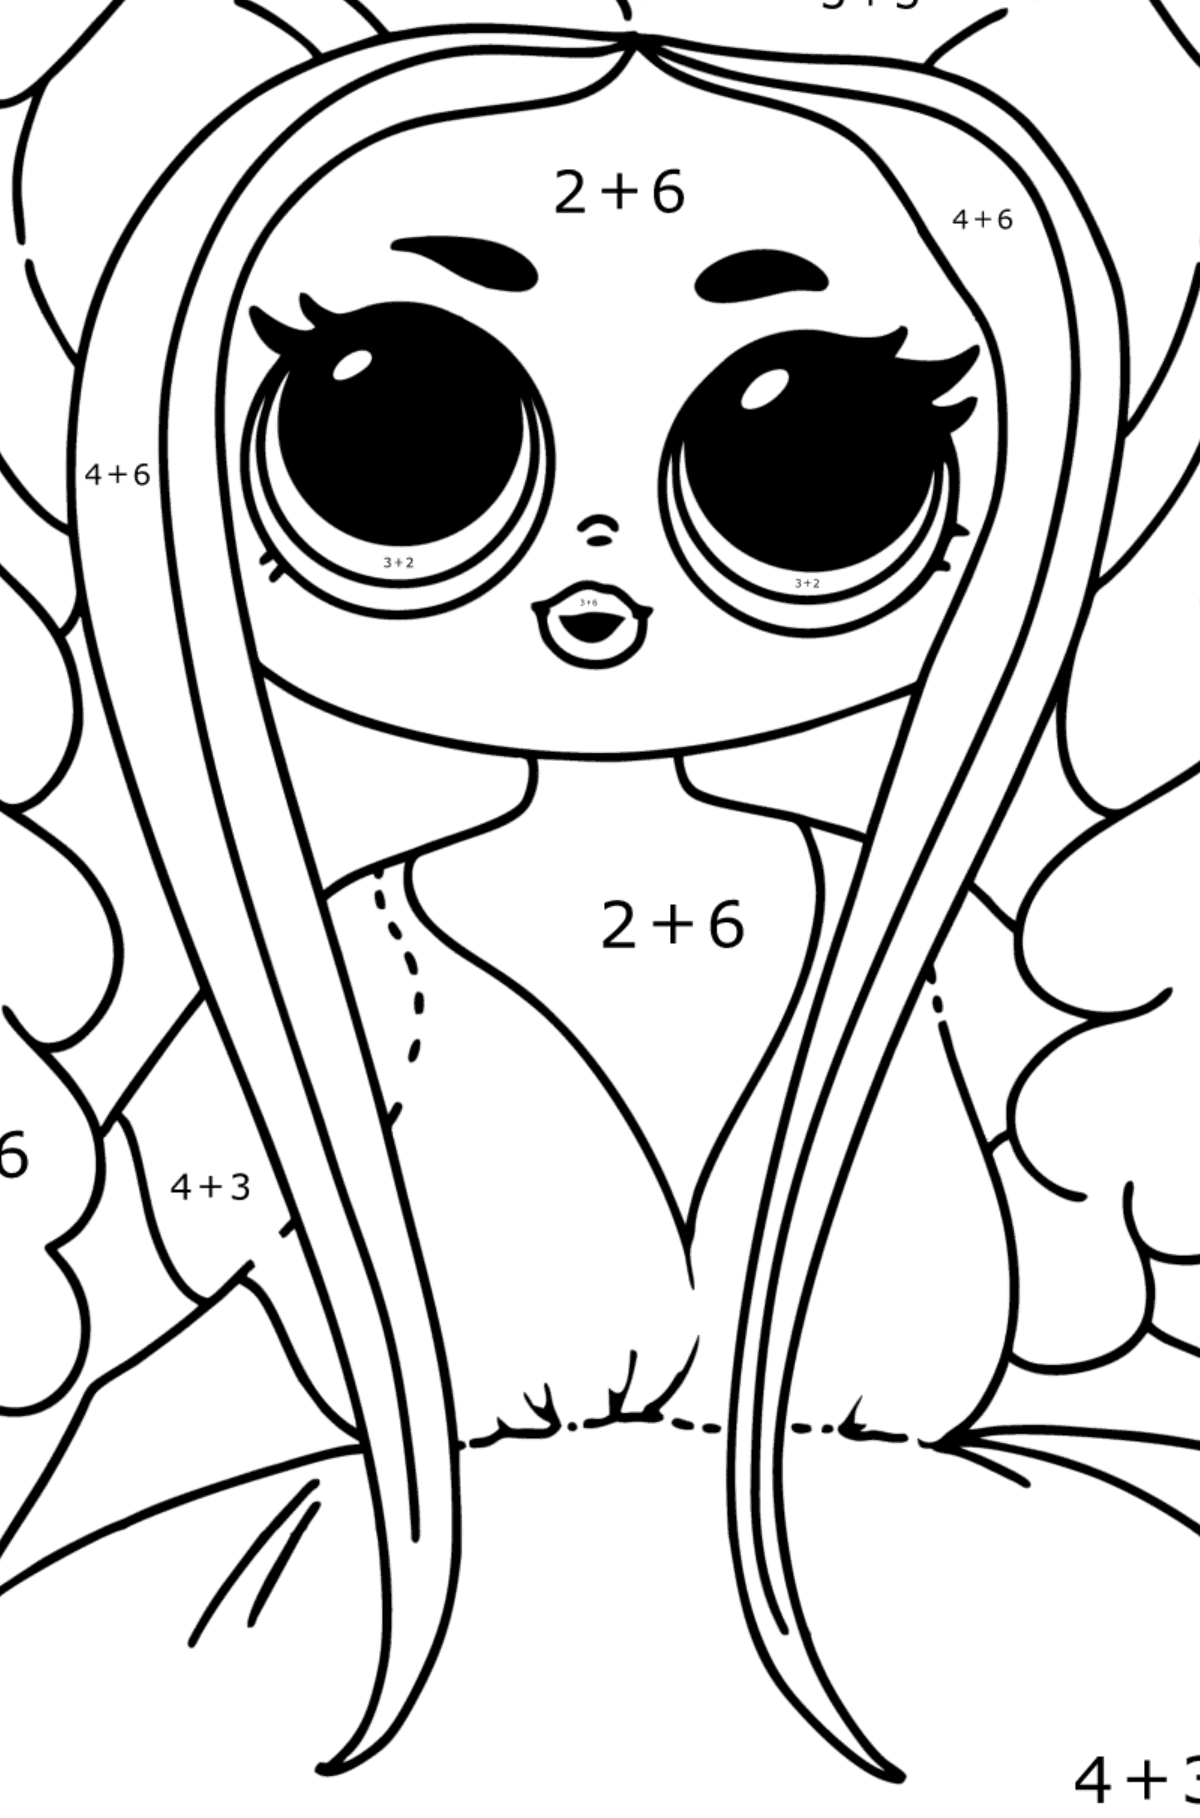 Coloring page LOL OMG Honeylicious Doll - Math Coloring - Addition for Kids